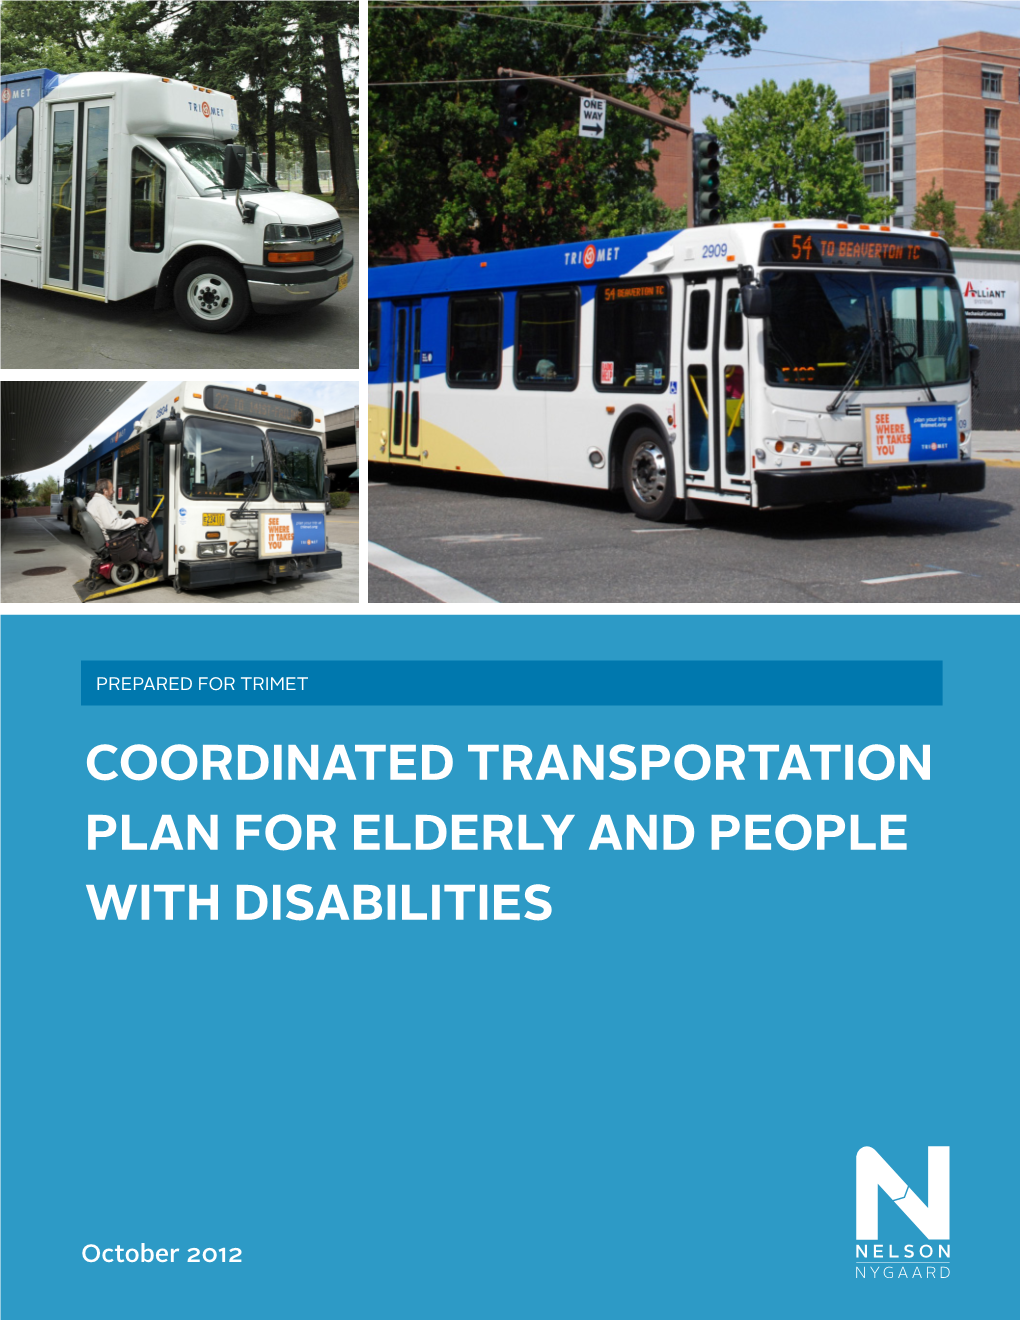 Coordinated Transportation Plan for Elderly and People with Disabilities